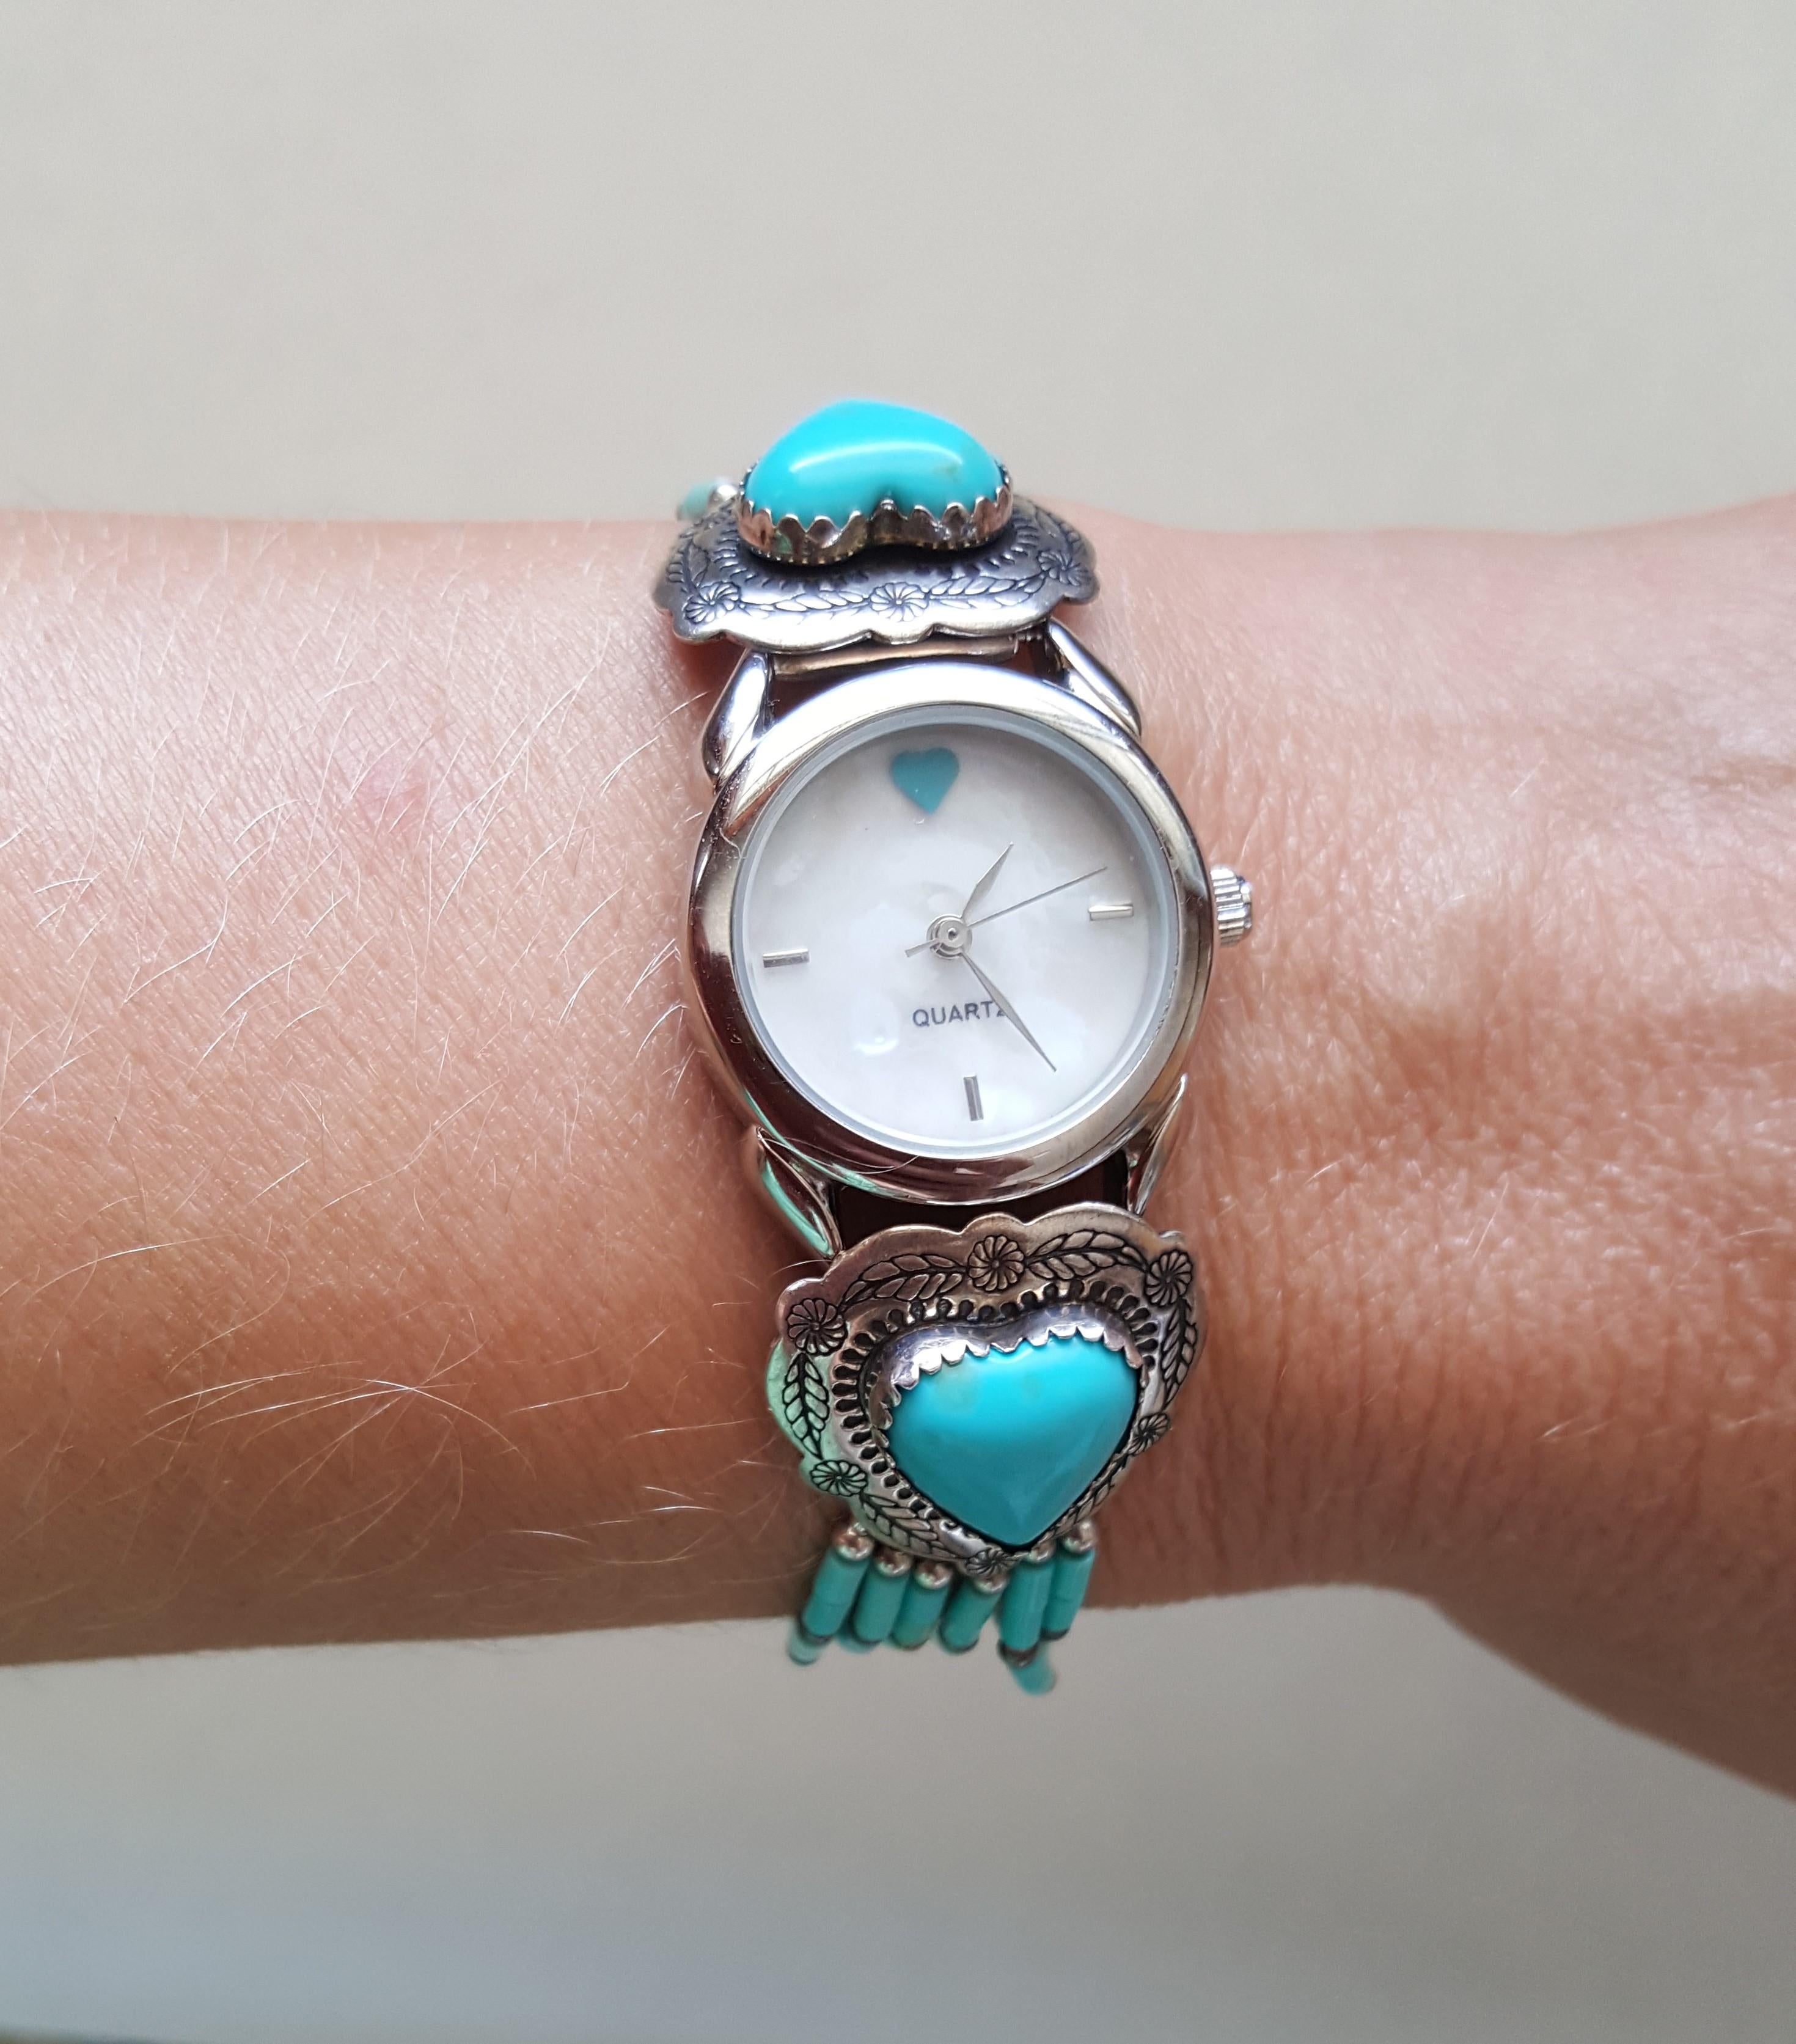 Ladies Navajo American Indian  925  Silver Heart Turquoise Watch, Quartz, Working, Mother of Pearl Face, Sgned Canyon De Chelly, New, 24mm. Signed with Designer Stamp.

Watch has a  heart at the 12 o' clock, weighs 25.09 grams, up to 7 inch plus